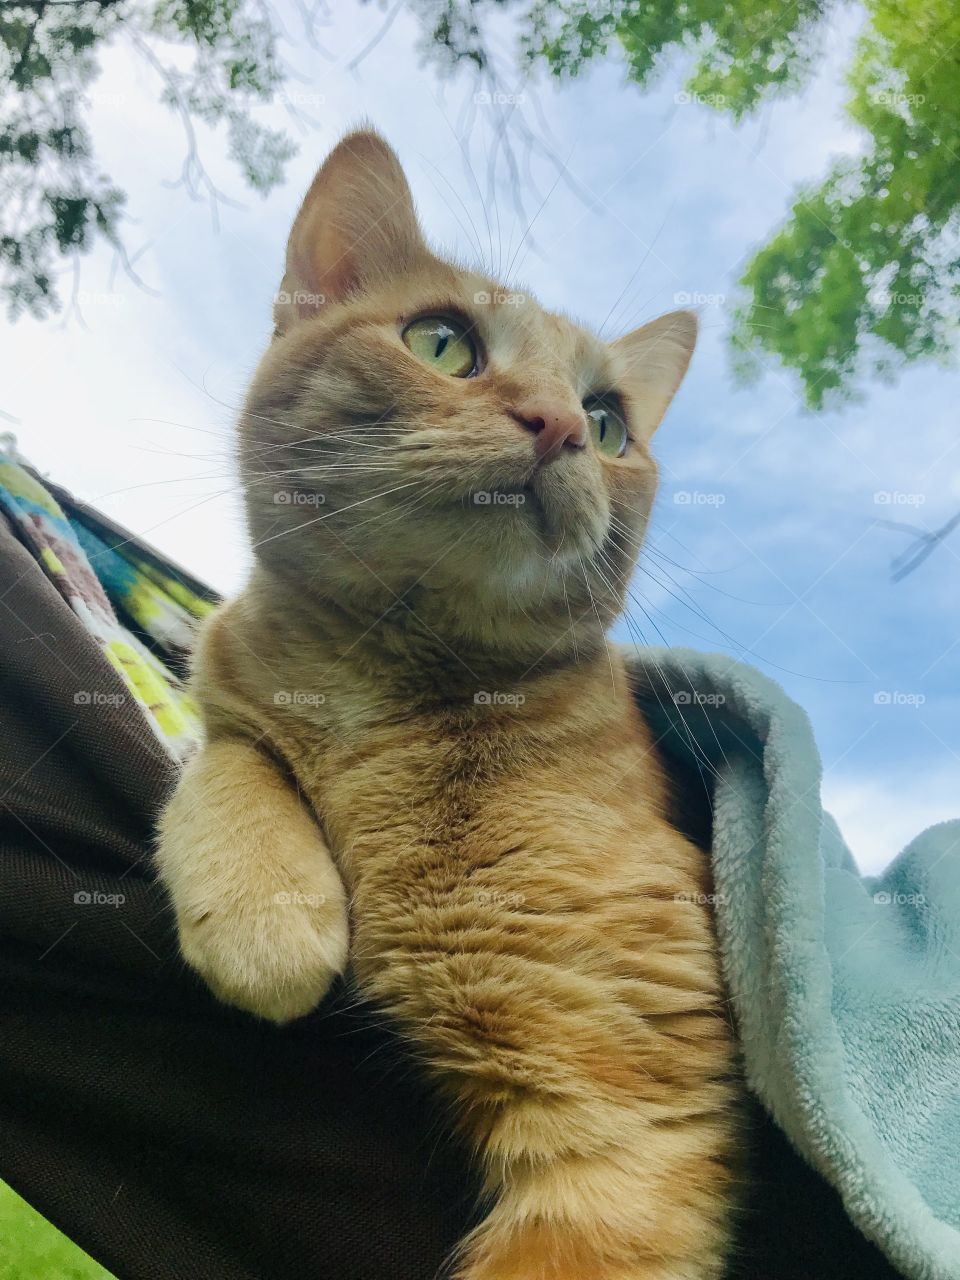 Gorgeous orange tabby kitty cat sitting in hammock all cozy covered in blue blanket! 